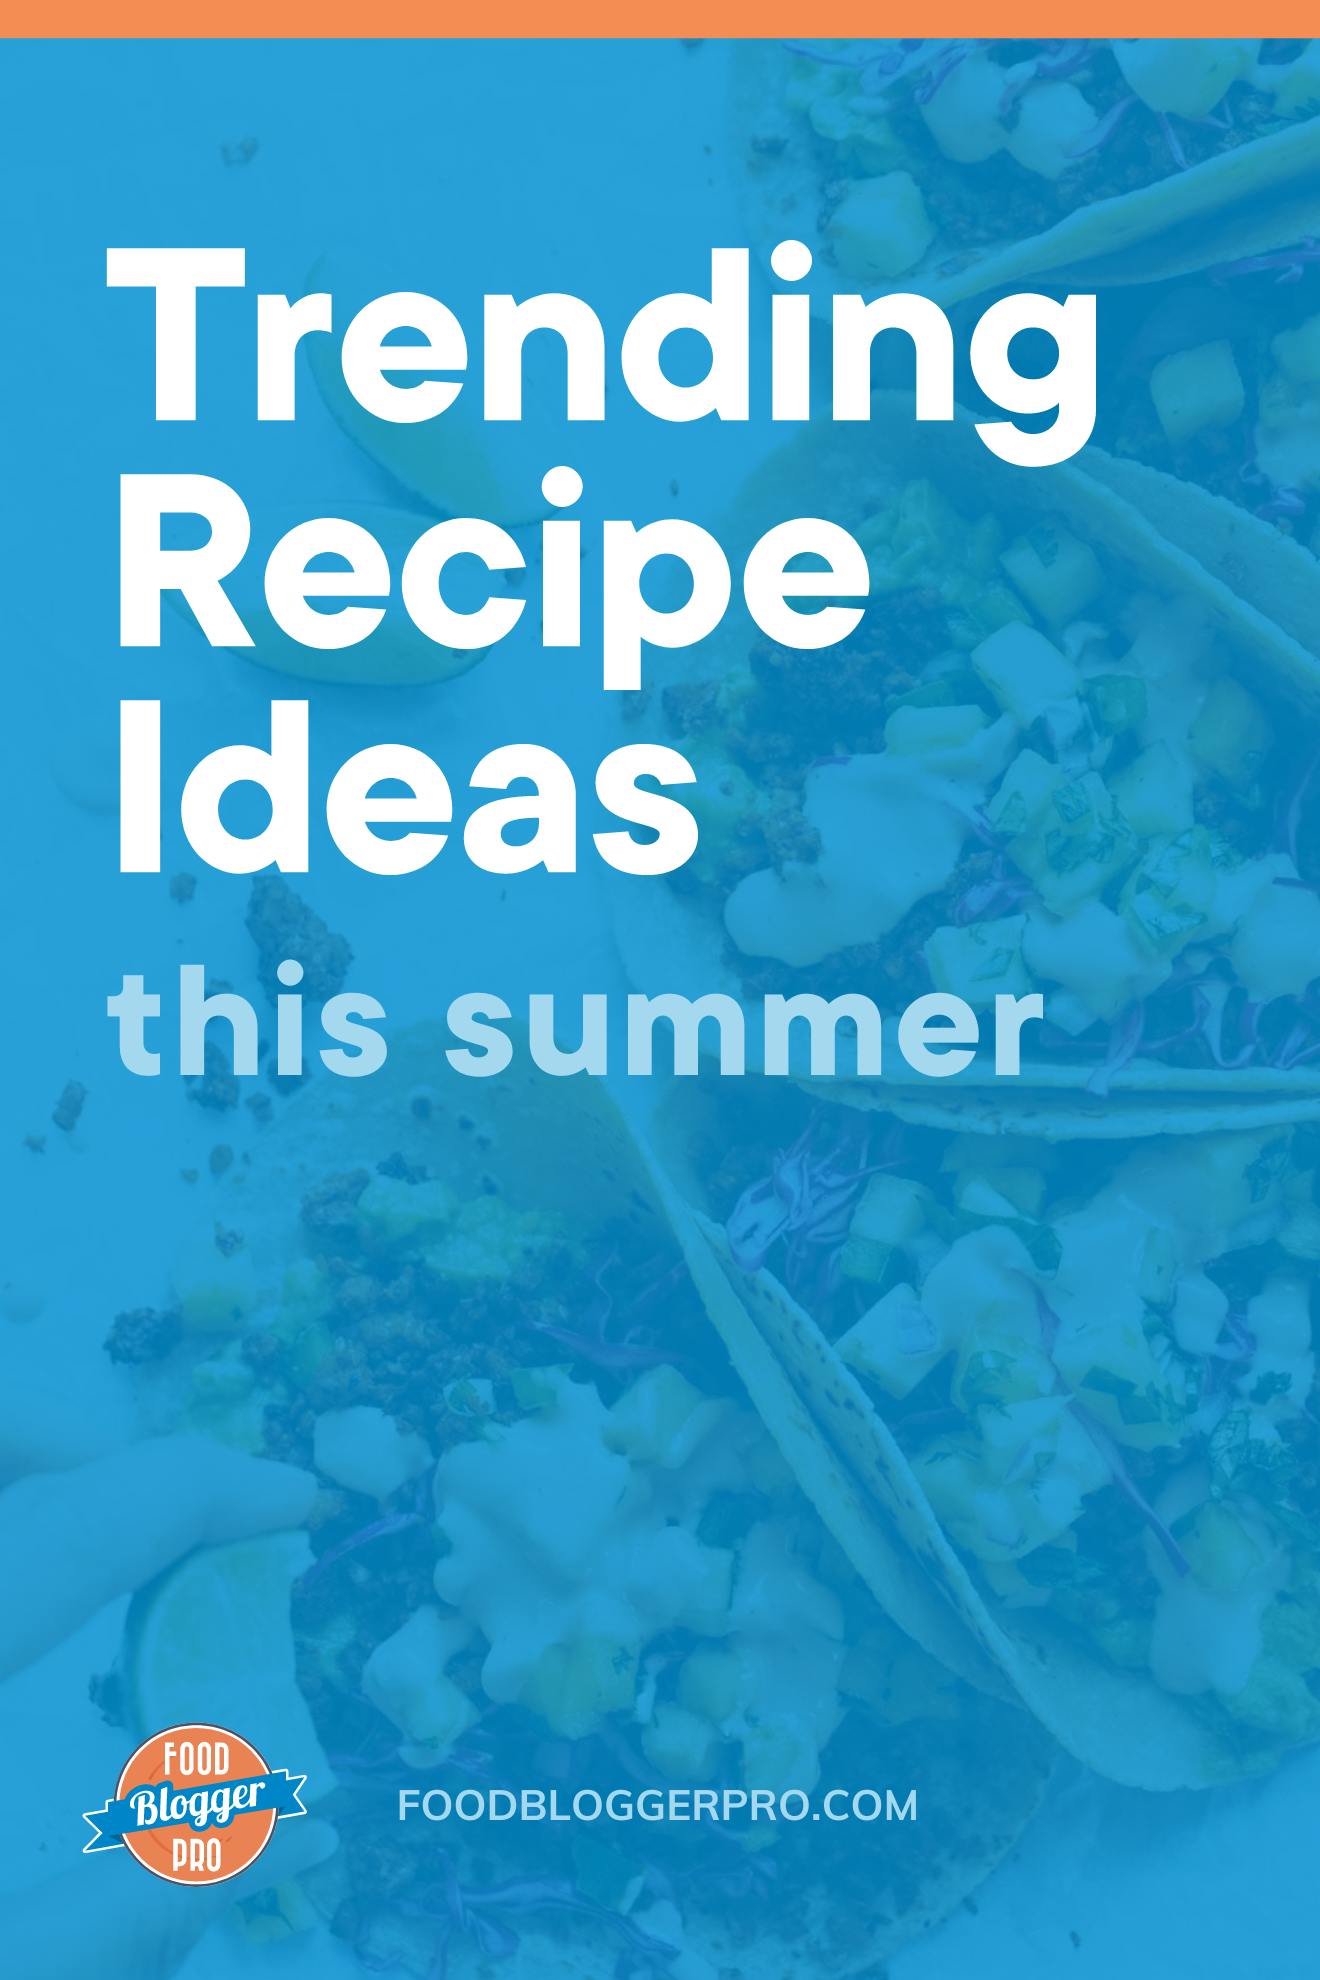 tacos on a plate and the title of this article 'trending recipe ideas this summer'